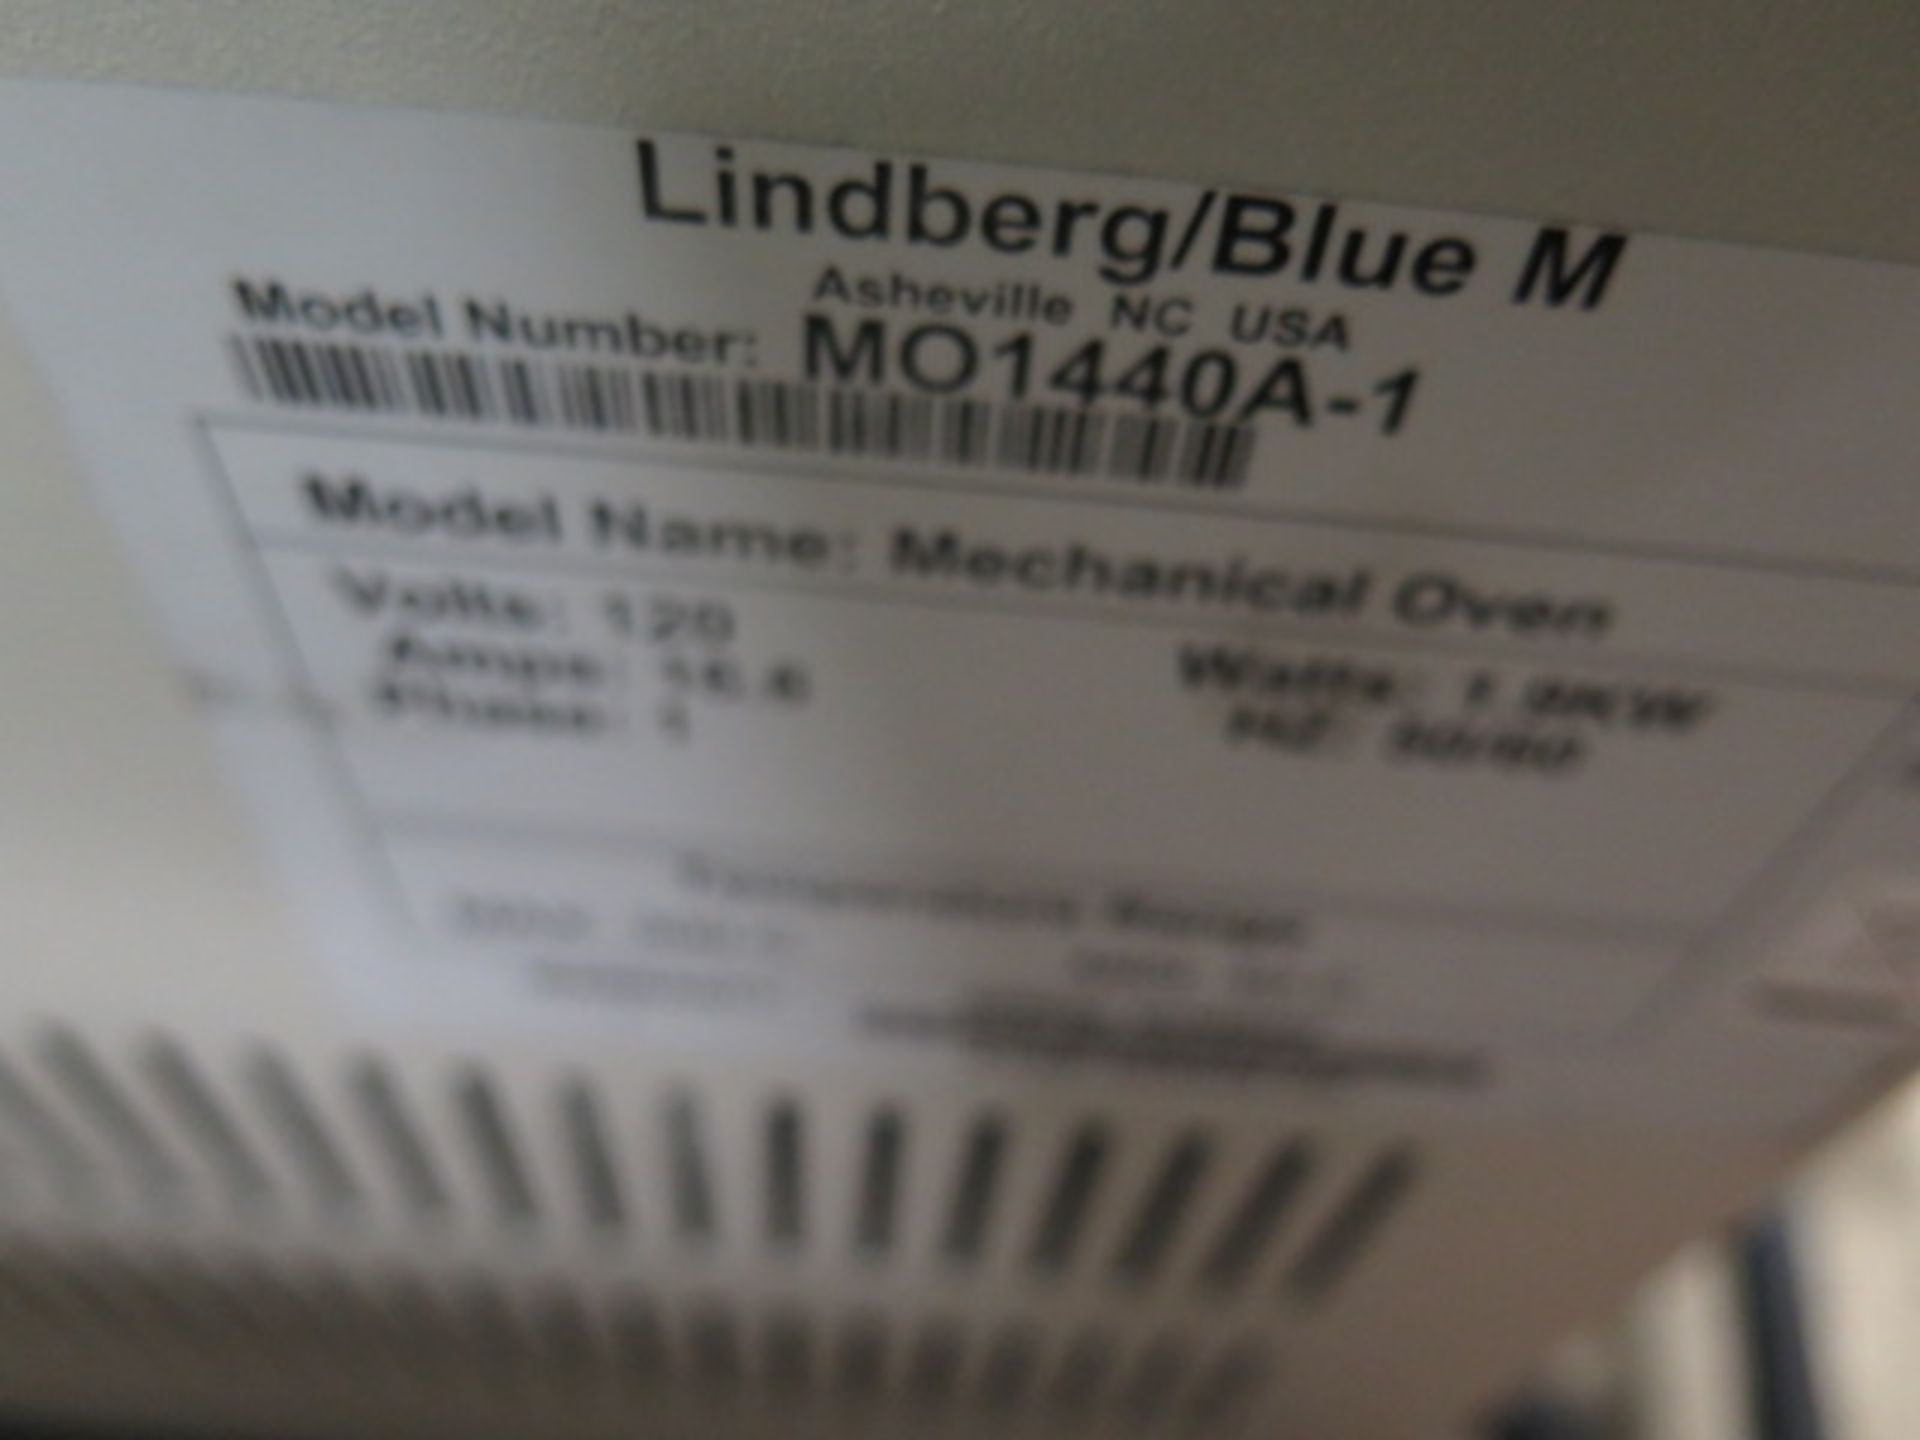 Thermo Electron Lindberg / BlueM mdl. MO1440A-1 Oven s/n Z15R-509008-ZR 300 Degrees C, SOLD AS IS - Image 8 of 8